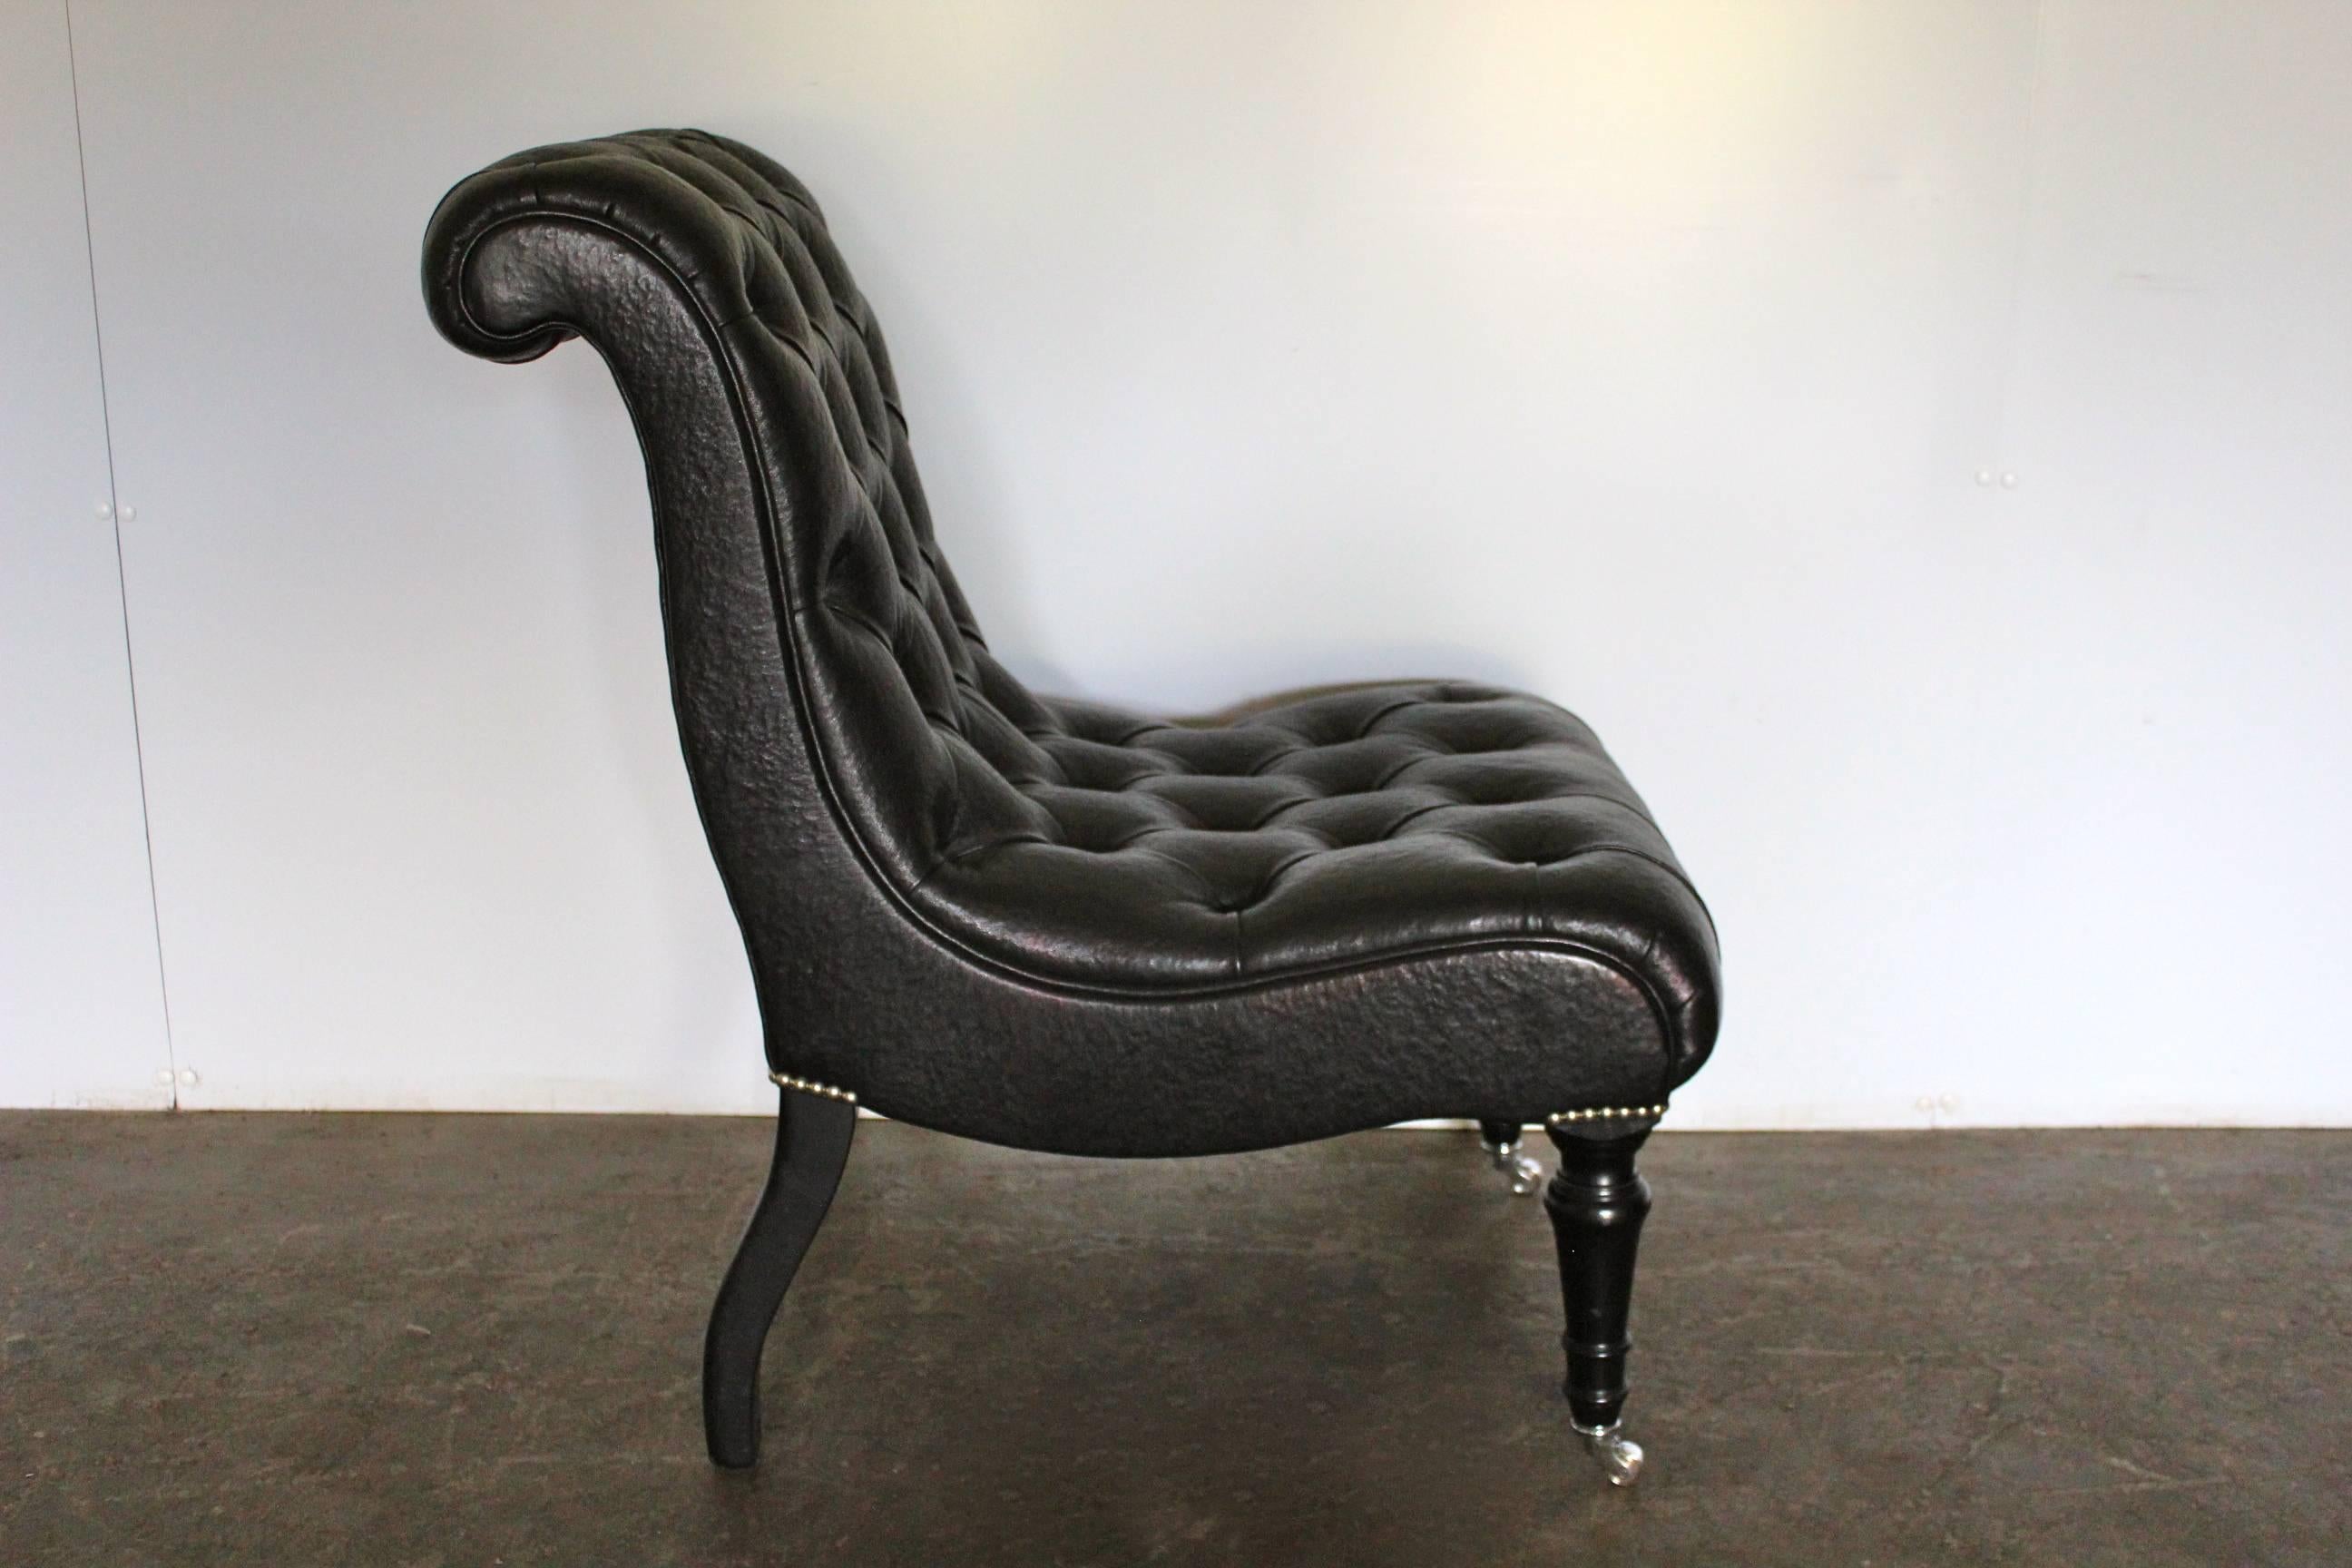 Hand-Crafted George Smith “Brewster” Armchair in Special-Order Black Leather